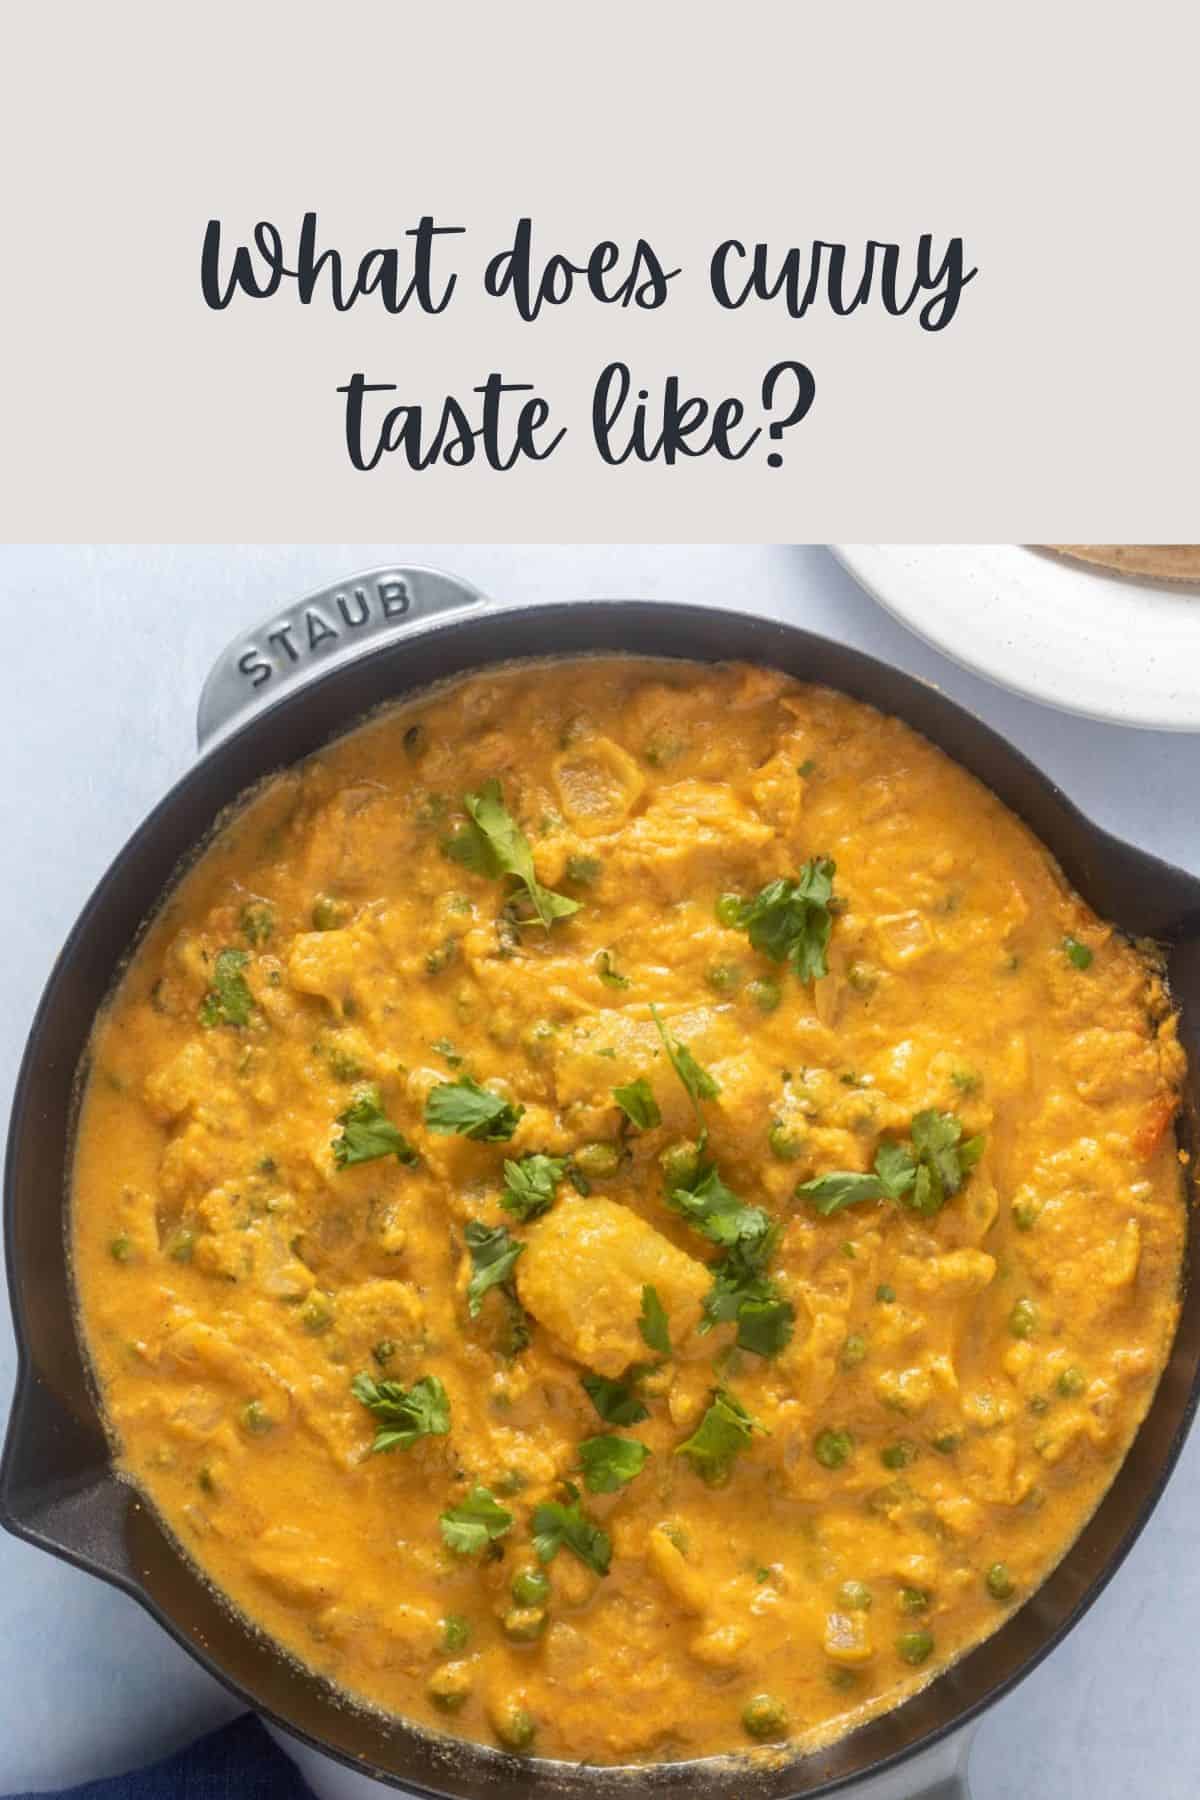 Close up of korma in skillet with text overlay of "What Does Curry Taste Like?"